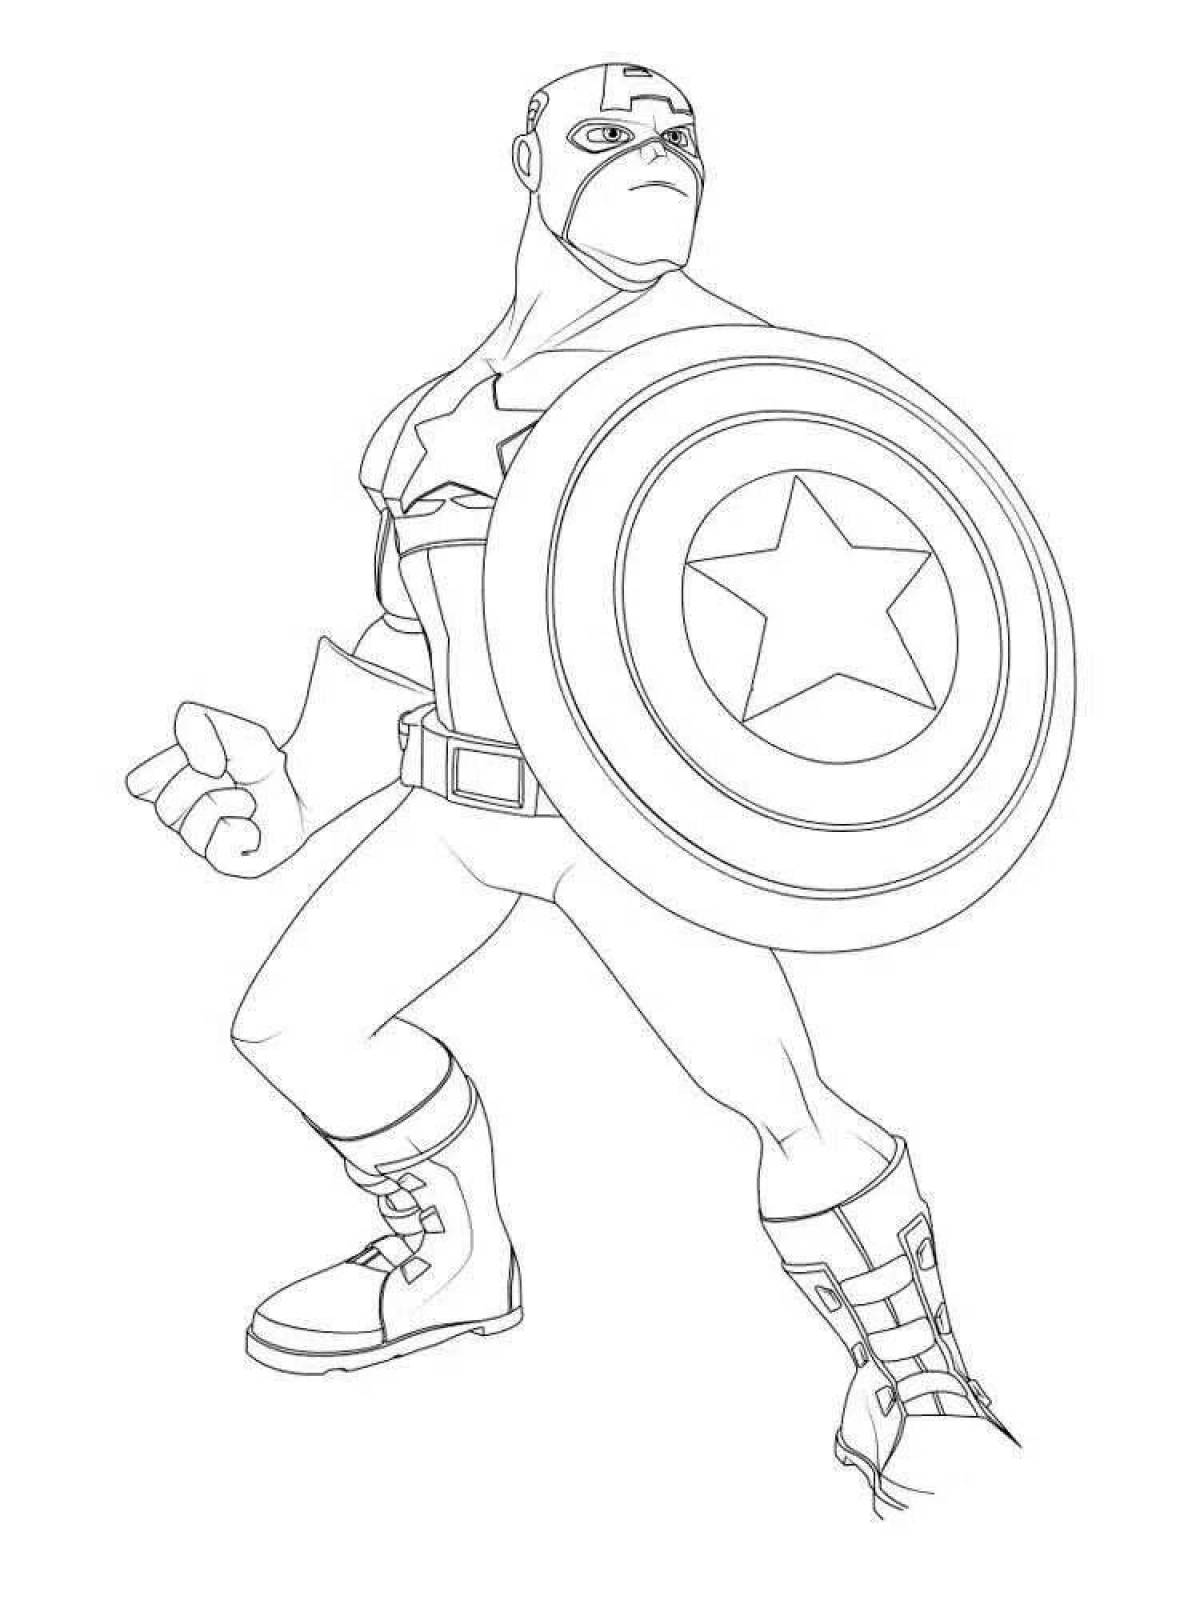 Captain America coloring page for kids